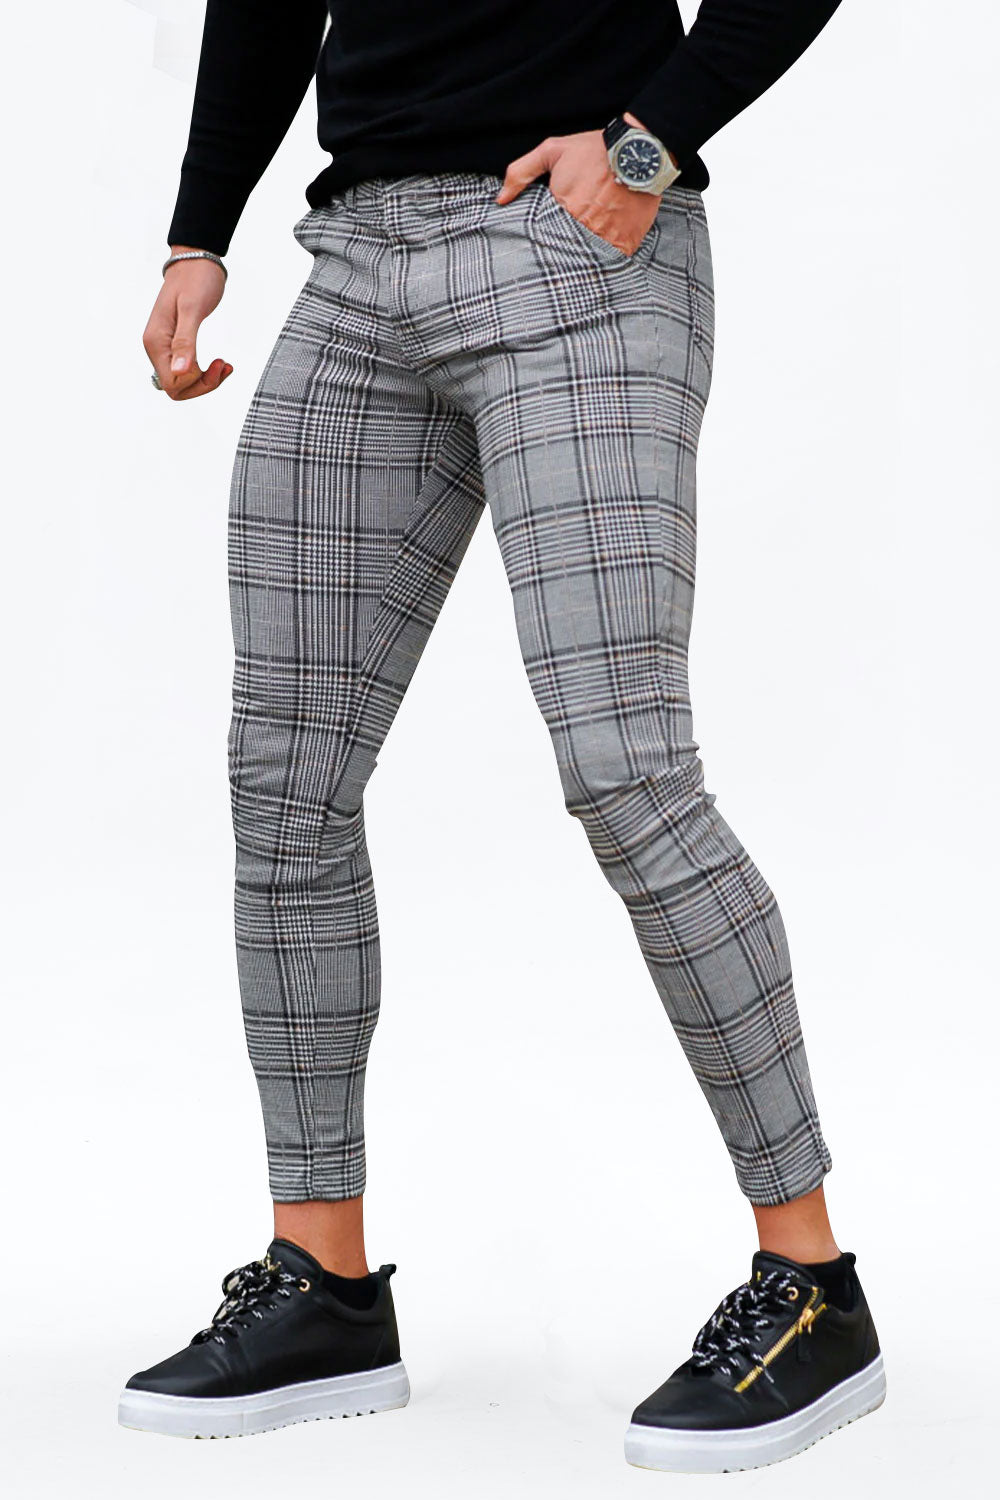 Shop Gintto Men's Grey Check Trousers – GINGTTO